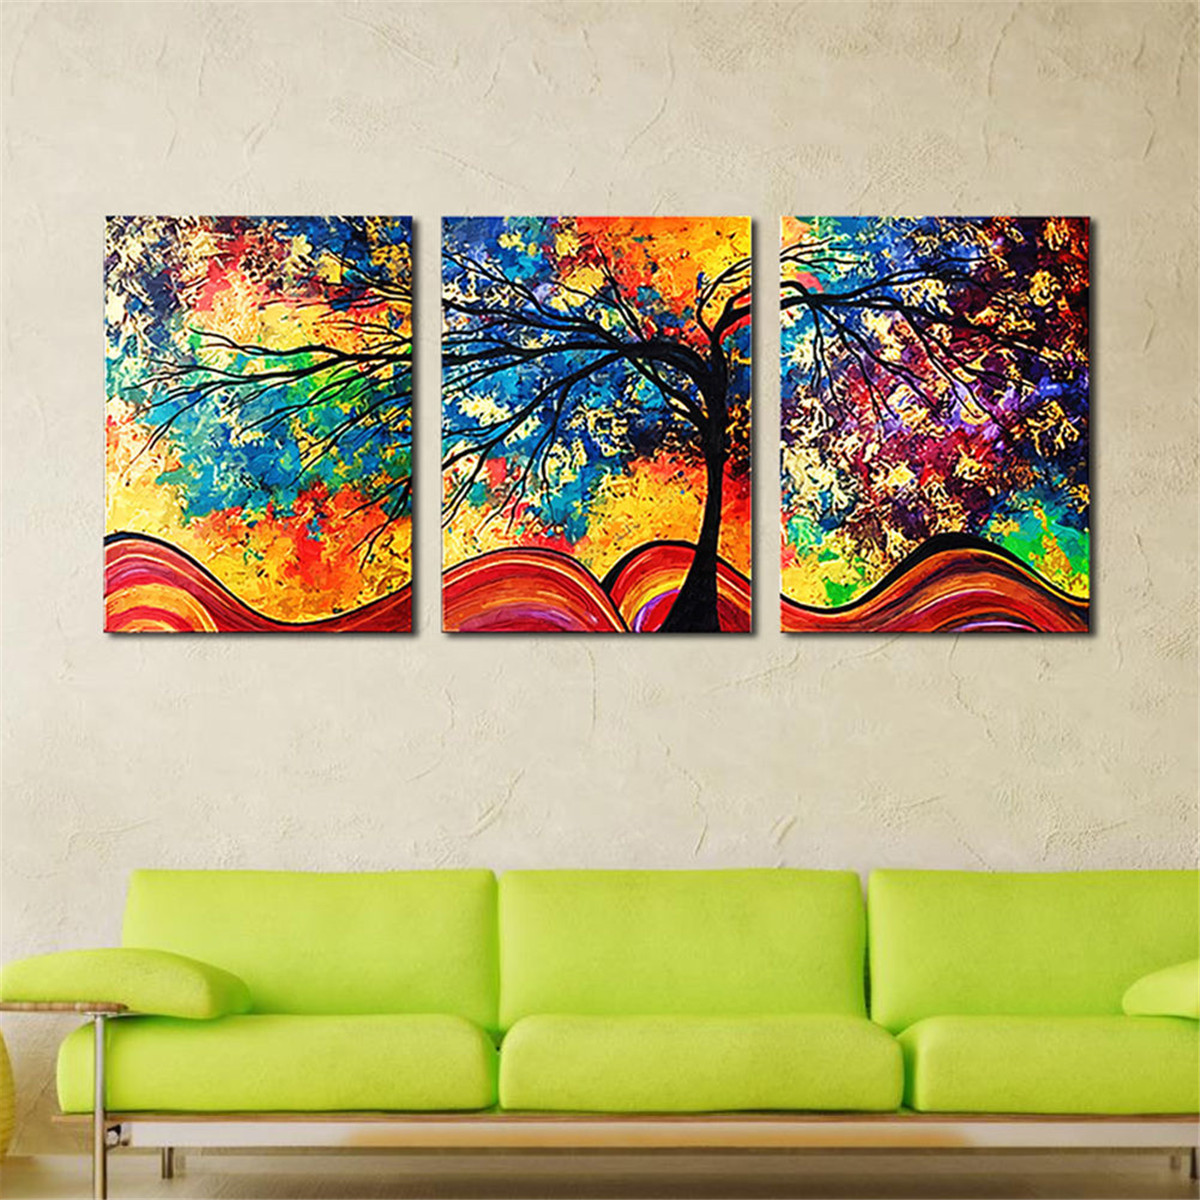 3Pcs-Colorful-Tree-HD-Canvas-Print-Paintings-Wall-Decorative-Print-Art-Pictures-FramedFrameless-Wall-1187263-7